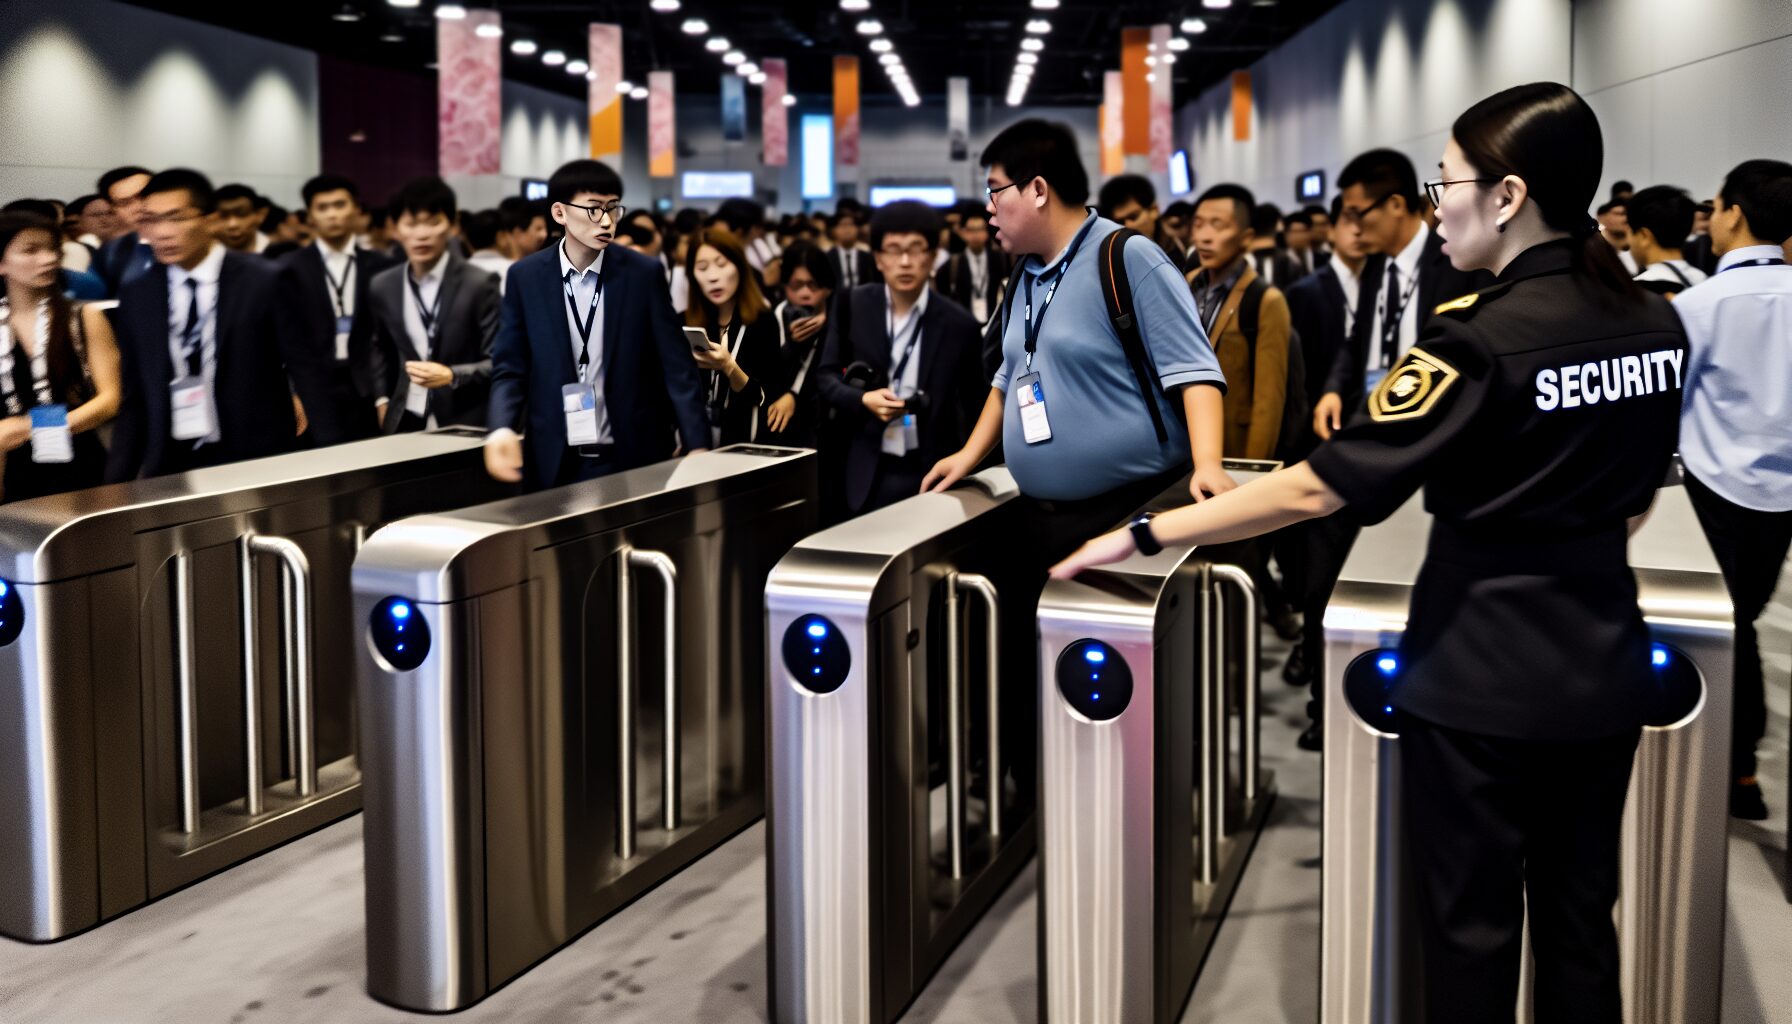 Security personnel monitoring a crowd passing through a turnstile barrier gate